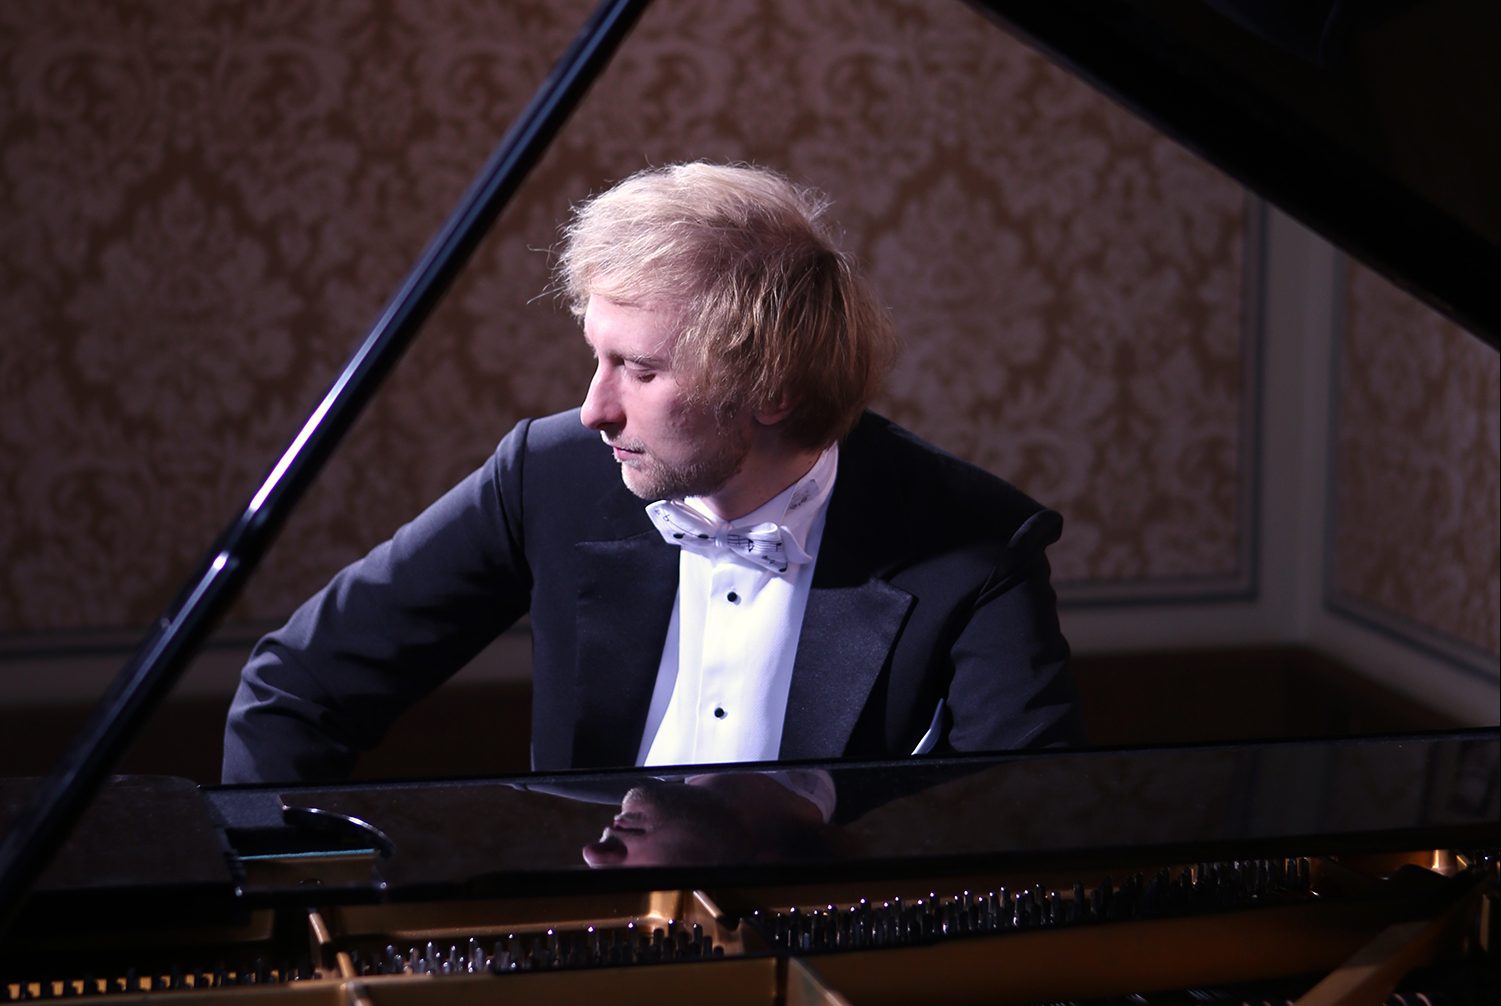 During the prestigious Monte Carlo festival Ivo Kahánek will take part in a piano roulette: 4 concerts in 1 evening